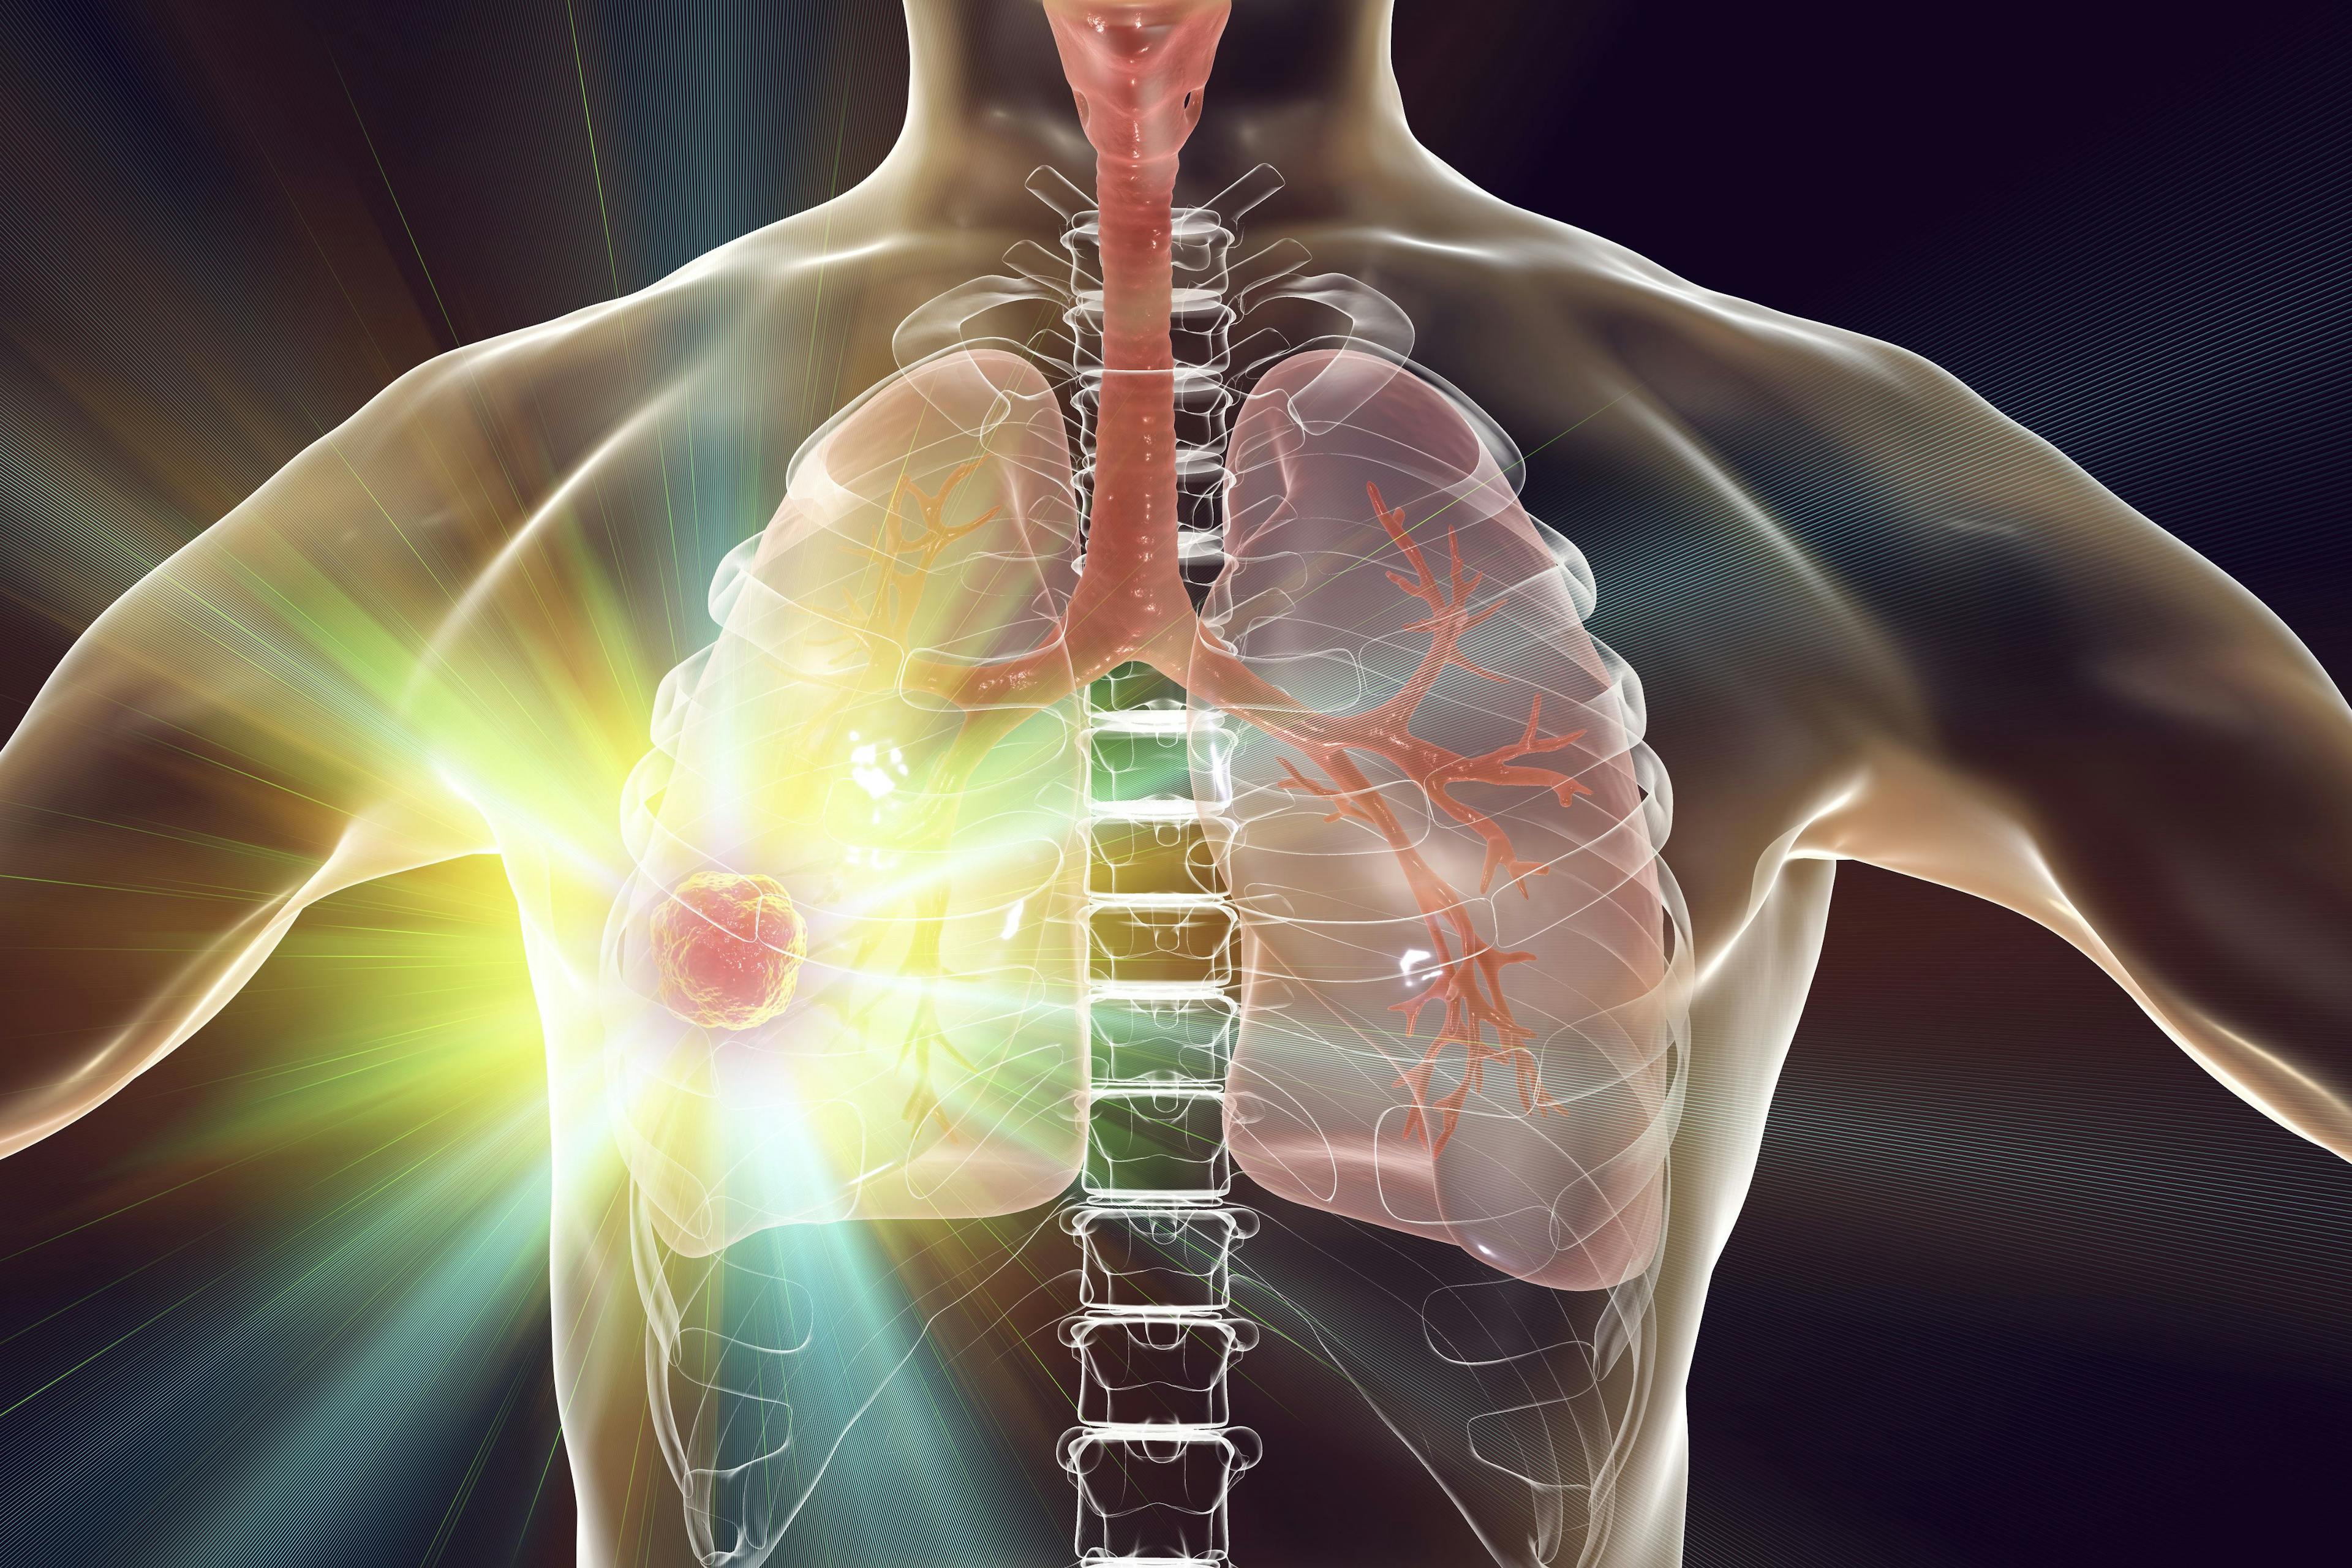 The overall survival improvements were observed when tumor-treating fields were combined with immune checkpoint inhibitors with a positive trend towards improvement when combined with docetaxel in those with stage IV non–small cell lung cancer.